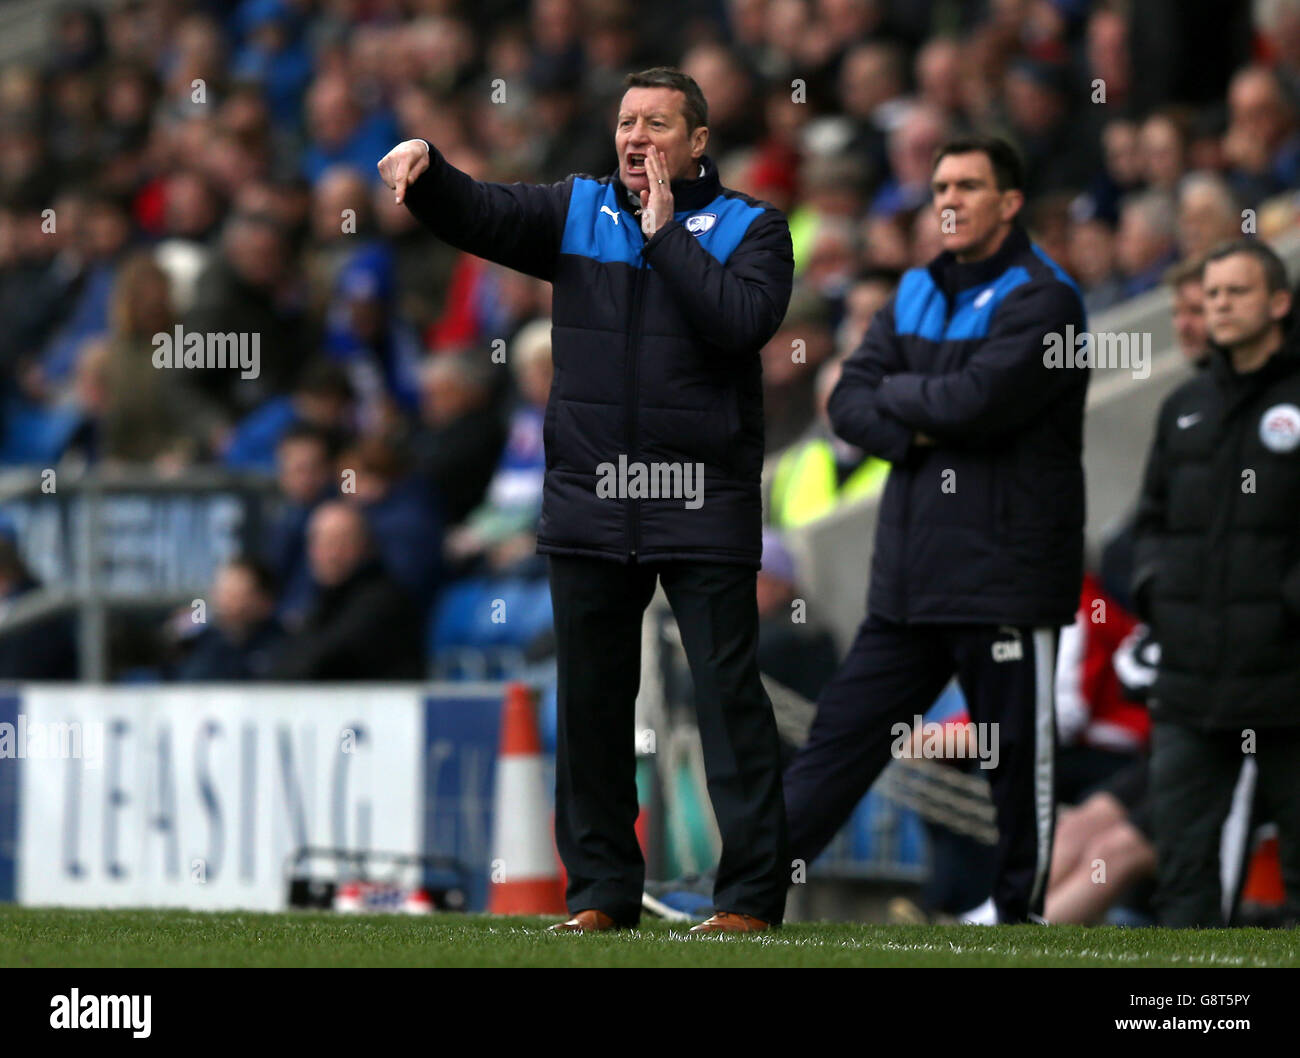 Chesterfield v Fleetwood Town - Sky Bet League One - Proact Stadium. Chesterfield manager Danny Wilson gestures on the touchline Stock Photo